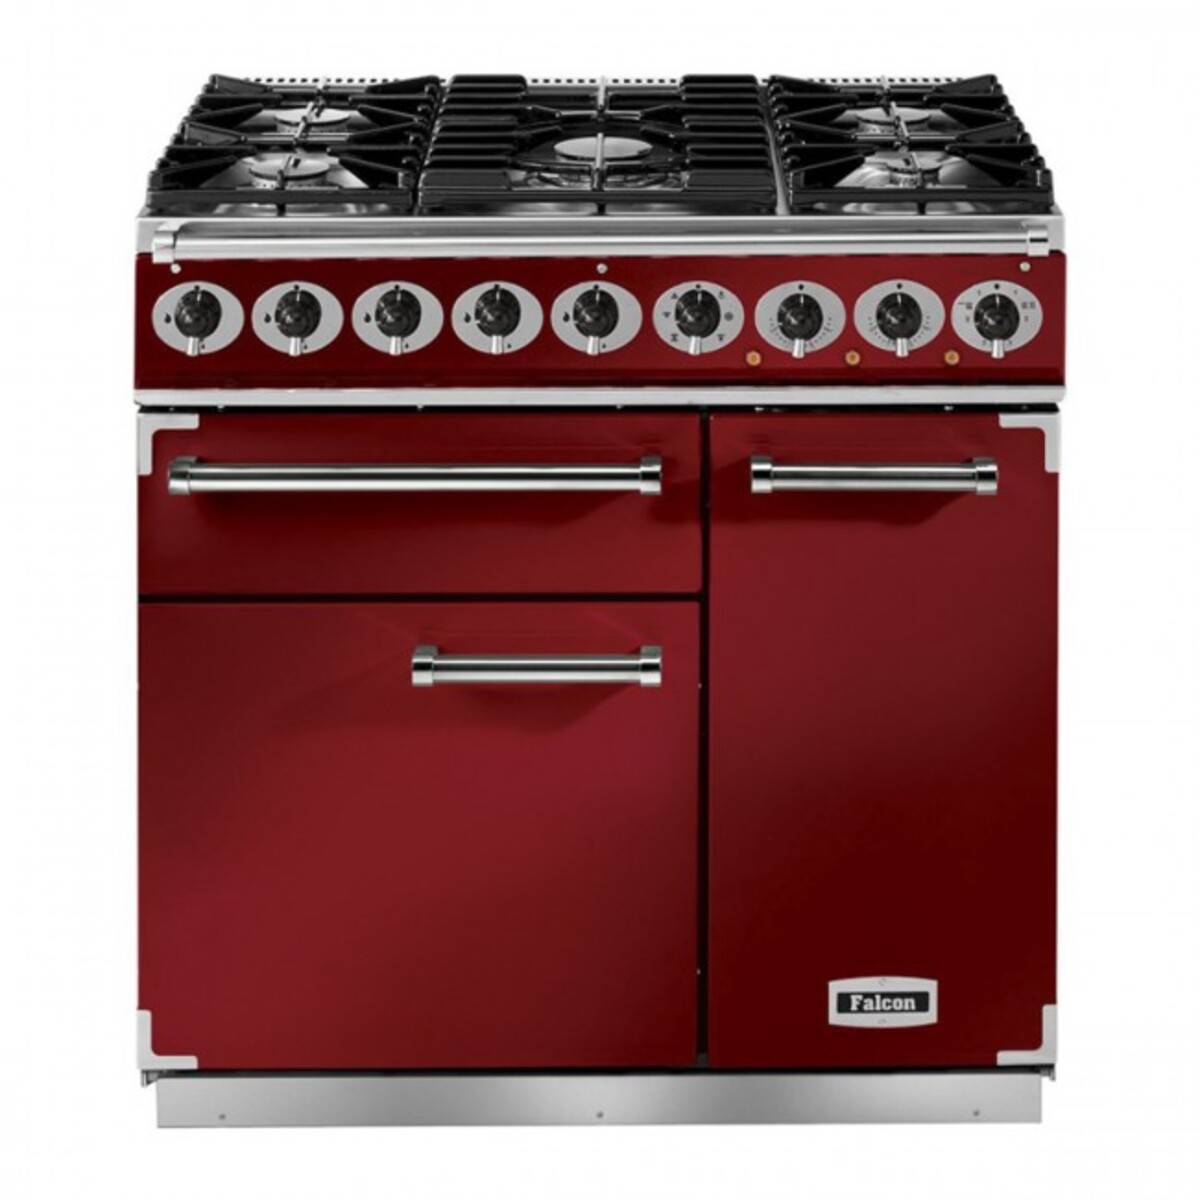 FALCON F900DXDFRDNM 87080 - 90cm Deluxe Dual Fuel Range Cooker, Red